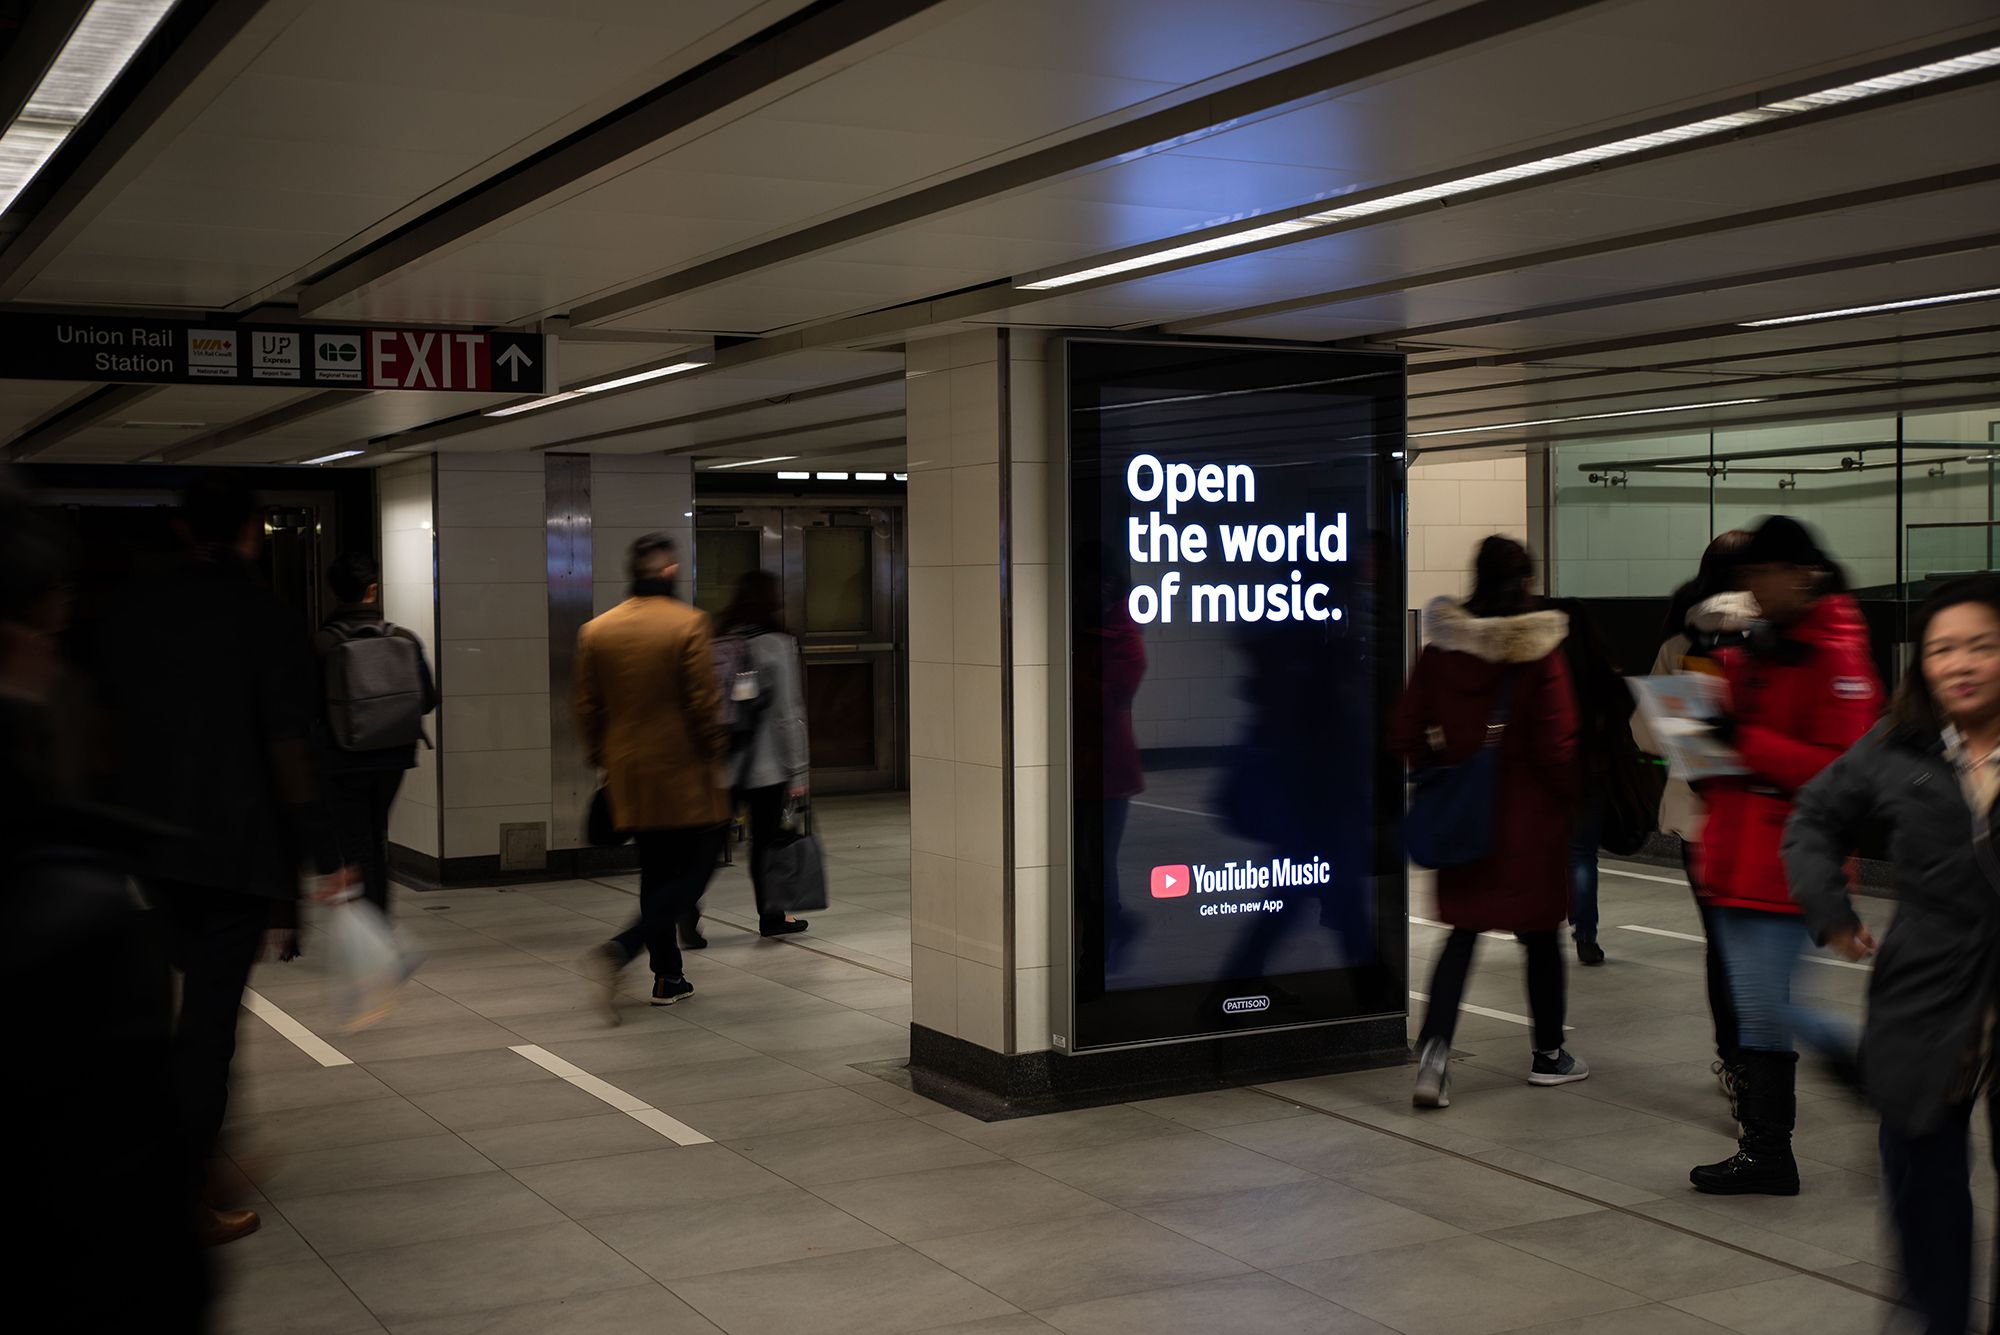 Digital Sign in train station says Open the world of music. Youtube Music Get the new app